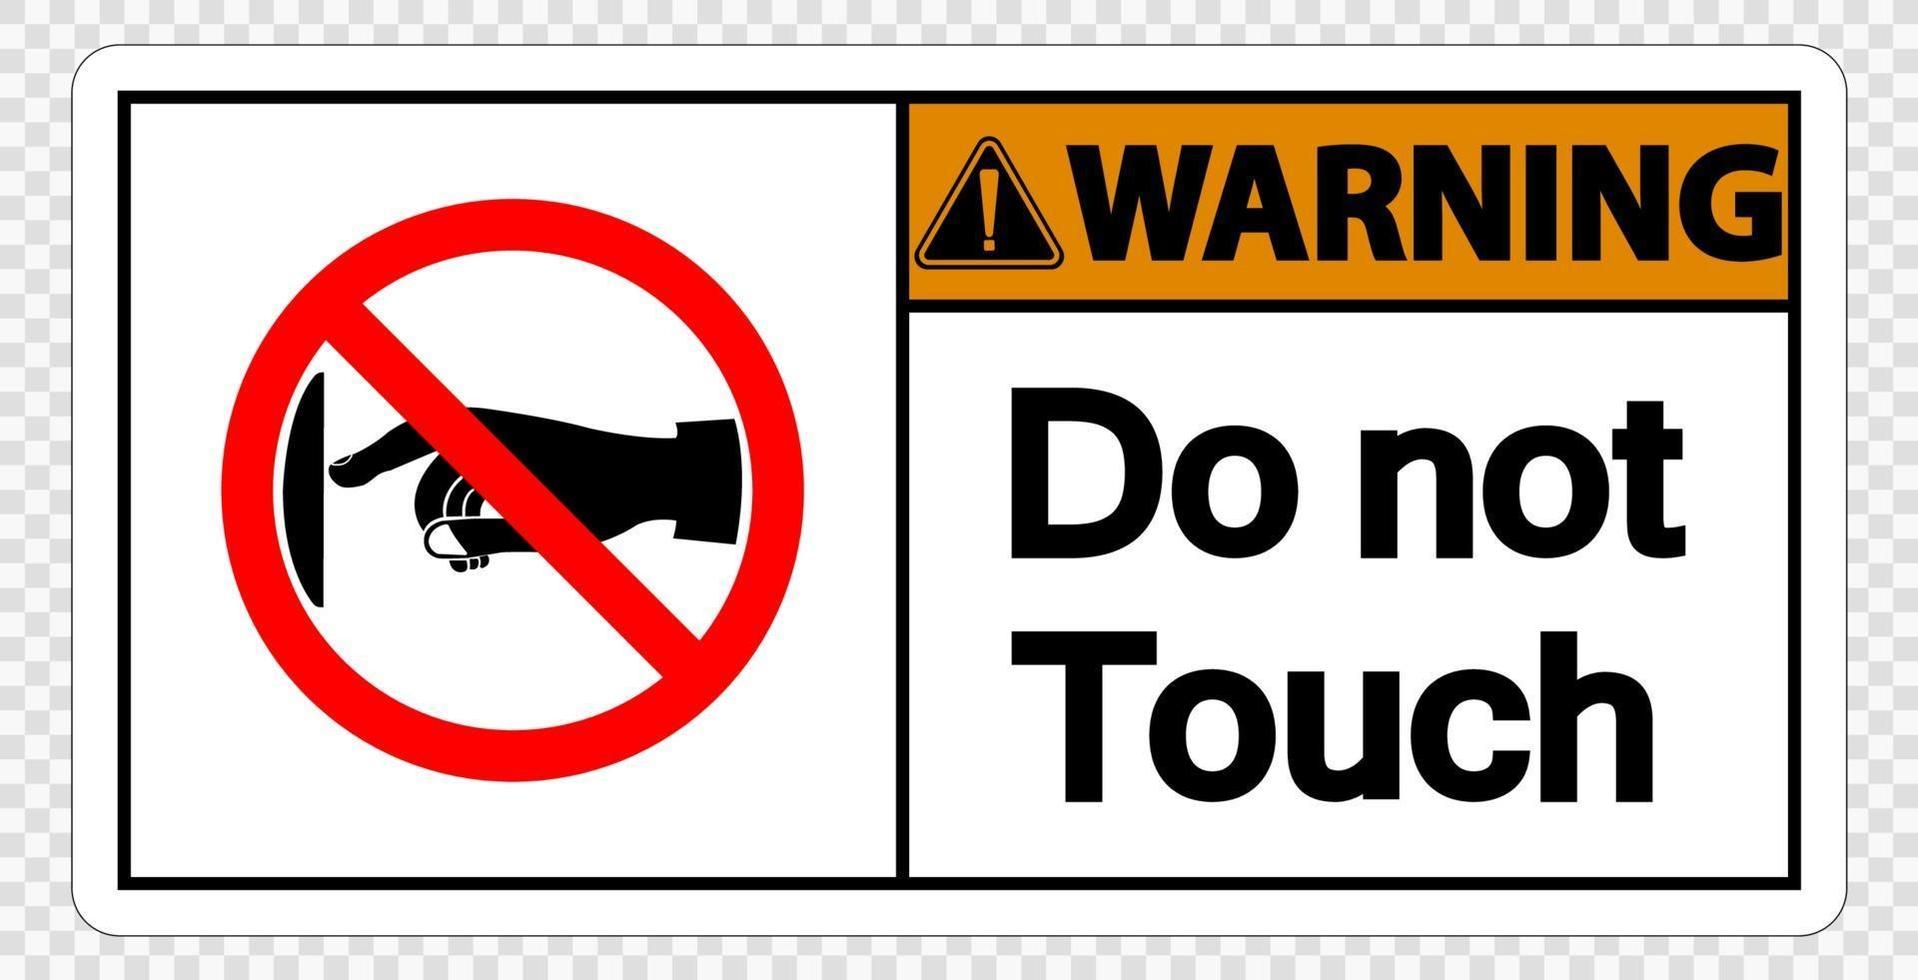 Warning do not touch sign label on transparent background vector